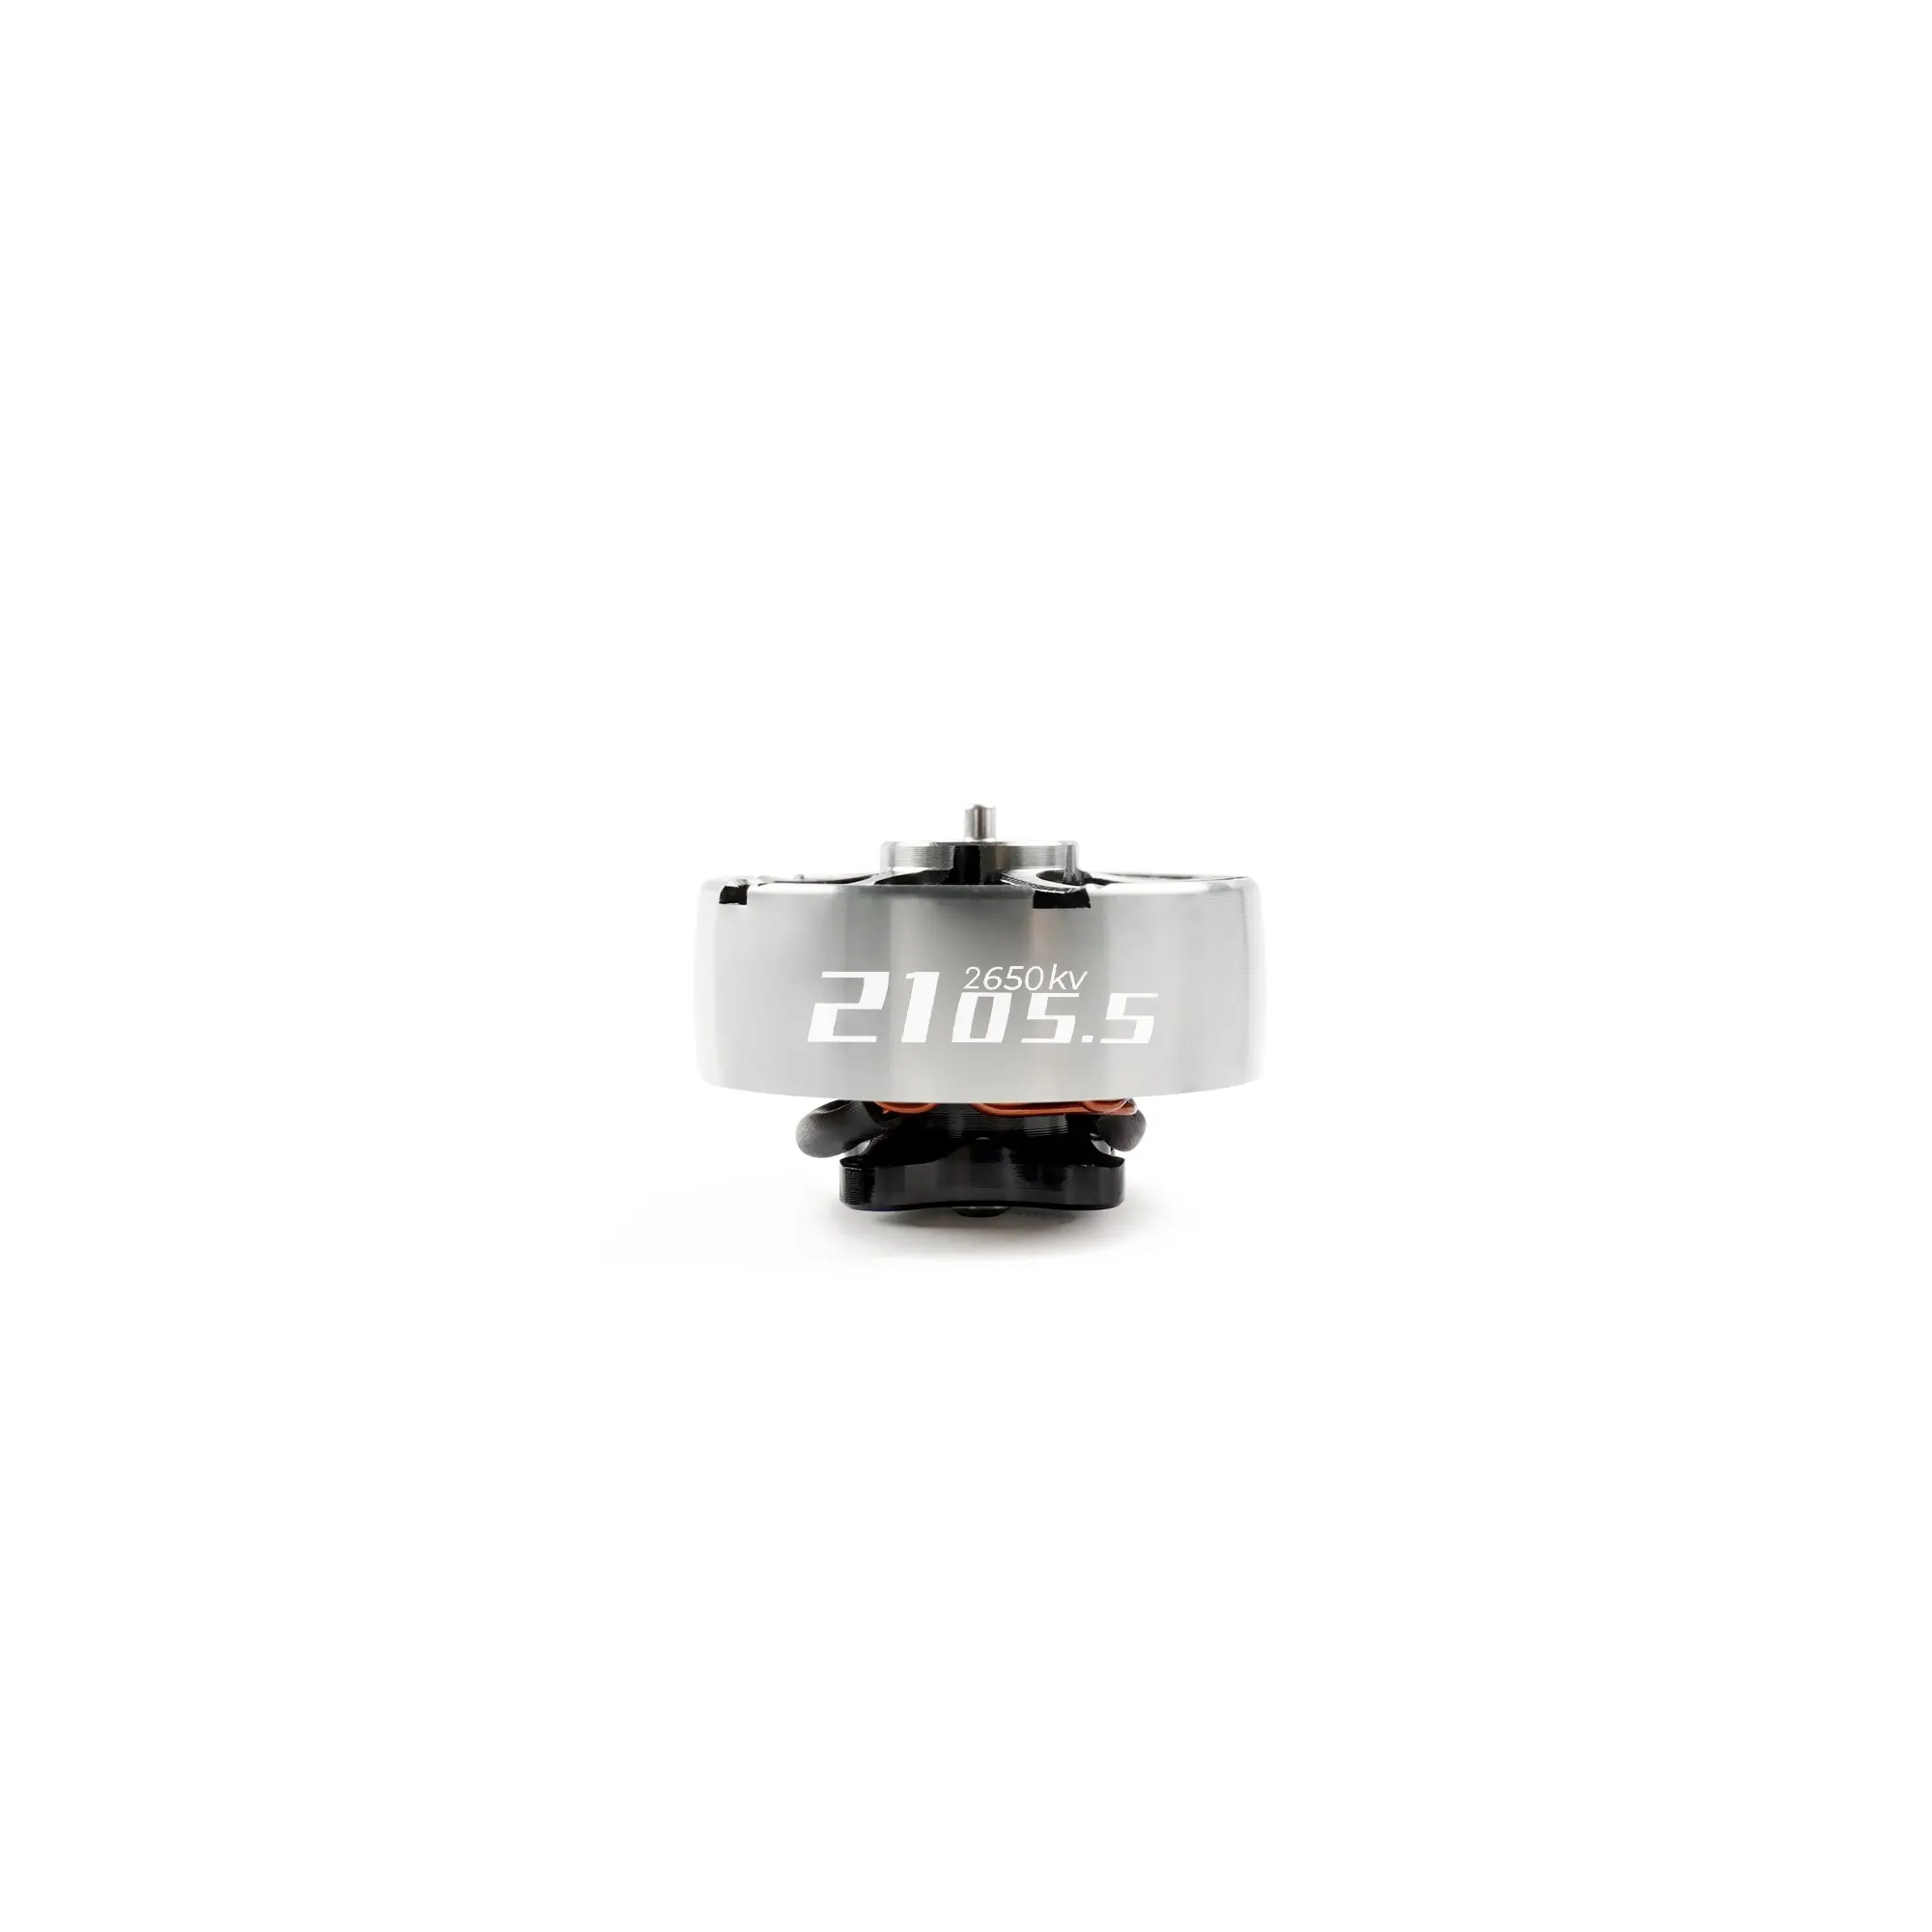 

GEPRC SPEEDX2 0803 Brushless Motor 11000KV Suitable For DIY RC FPV Quadcopter Tiny / Whoop Drone Accessories Replacement Parts